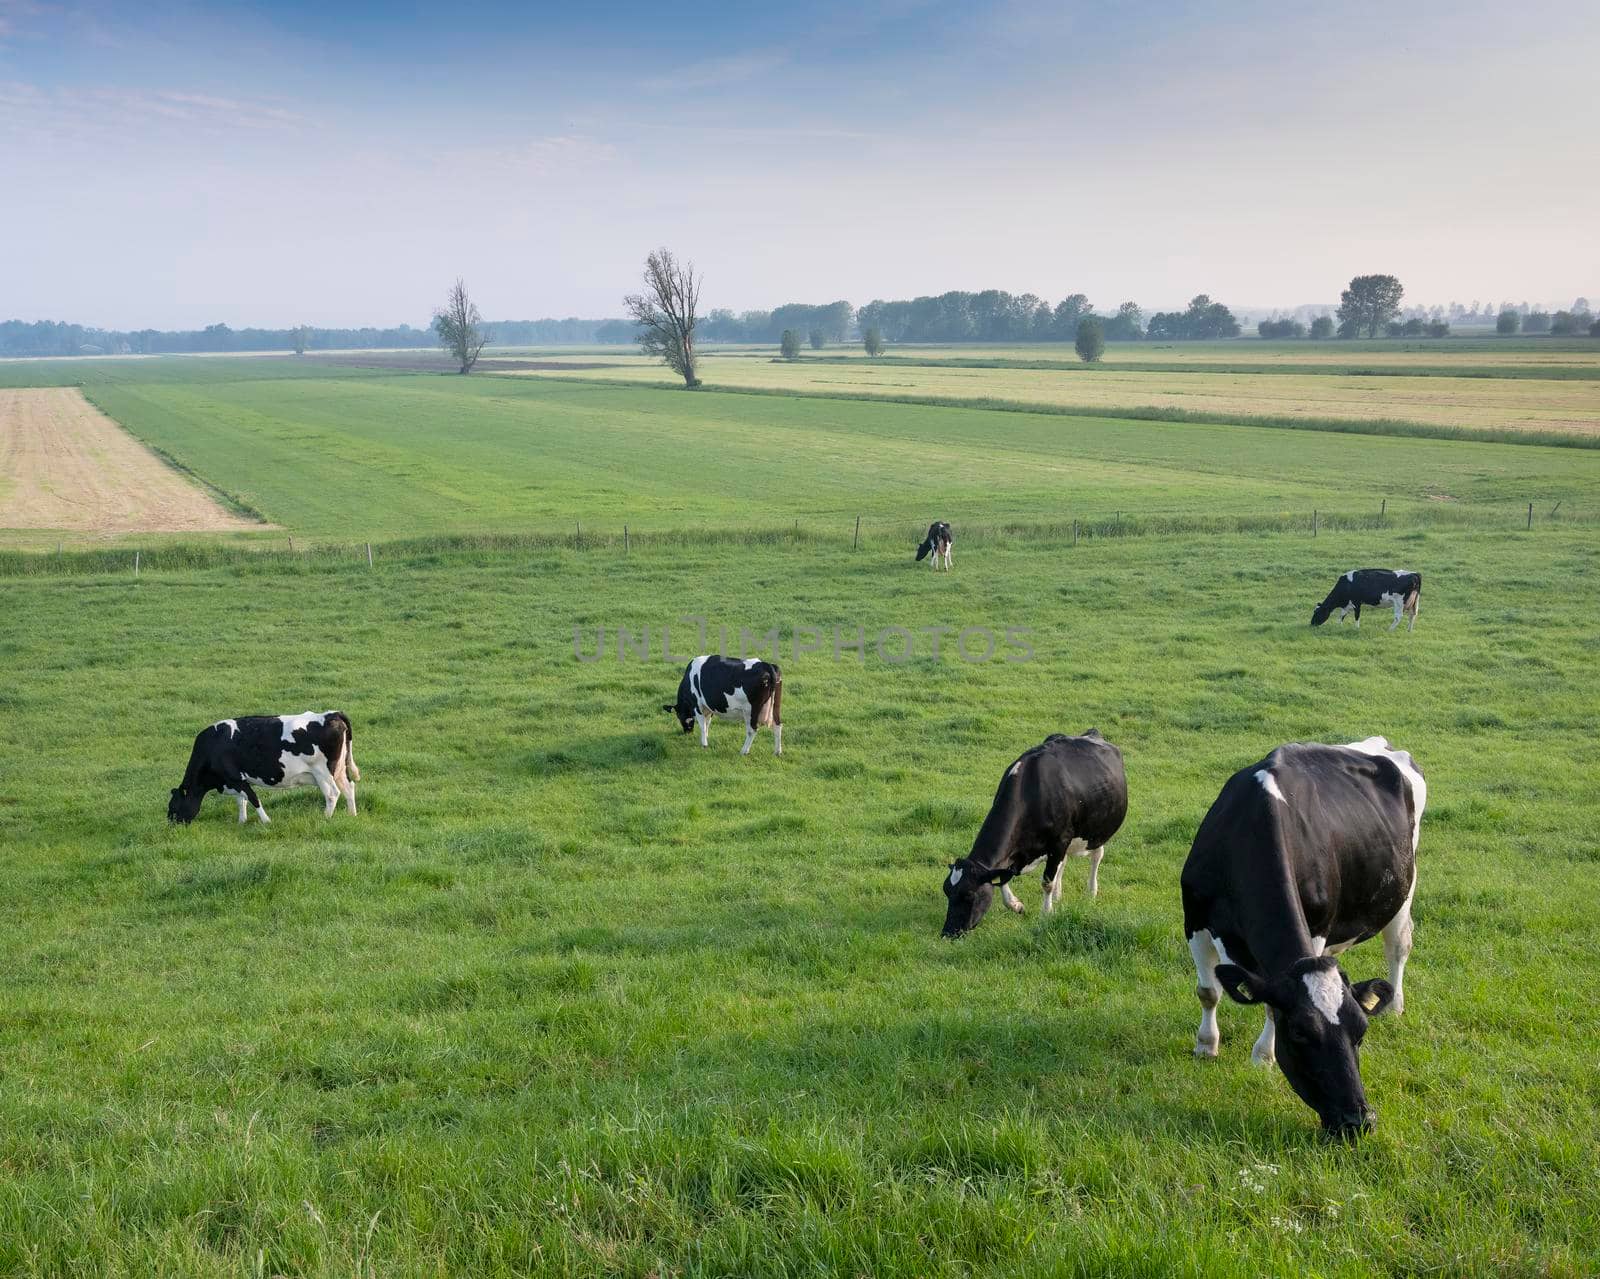 black and white spotted cows in green grassy meadow under blue sky seen from height of dike in holland between utrecht and arnhem near river rhine